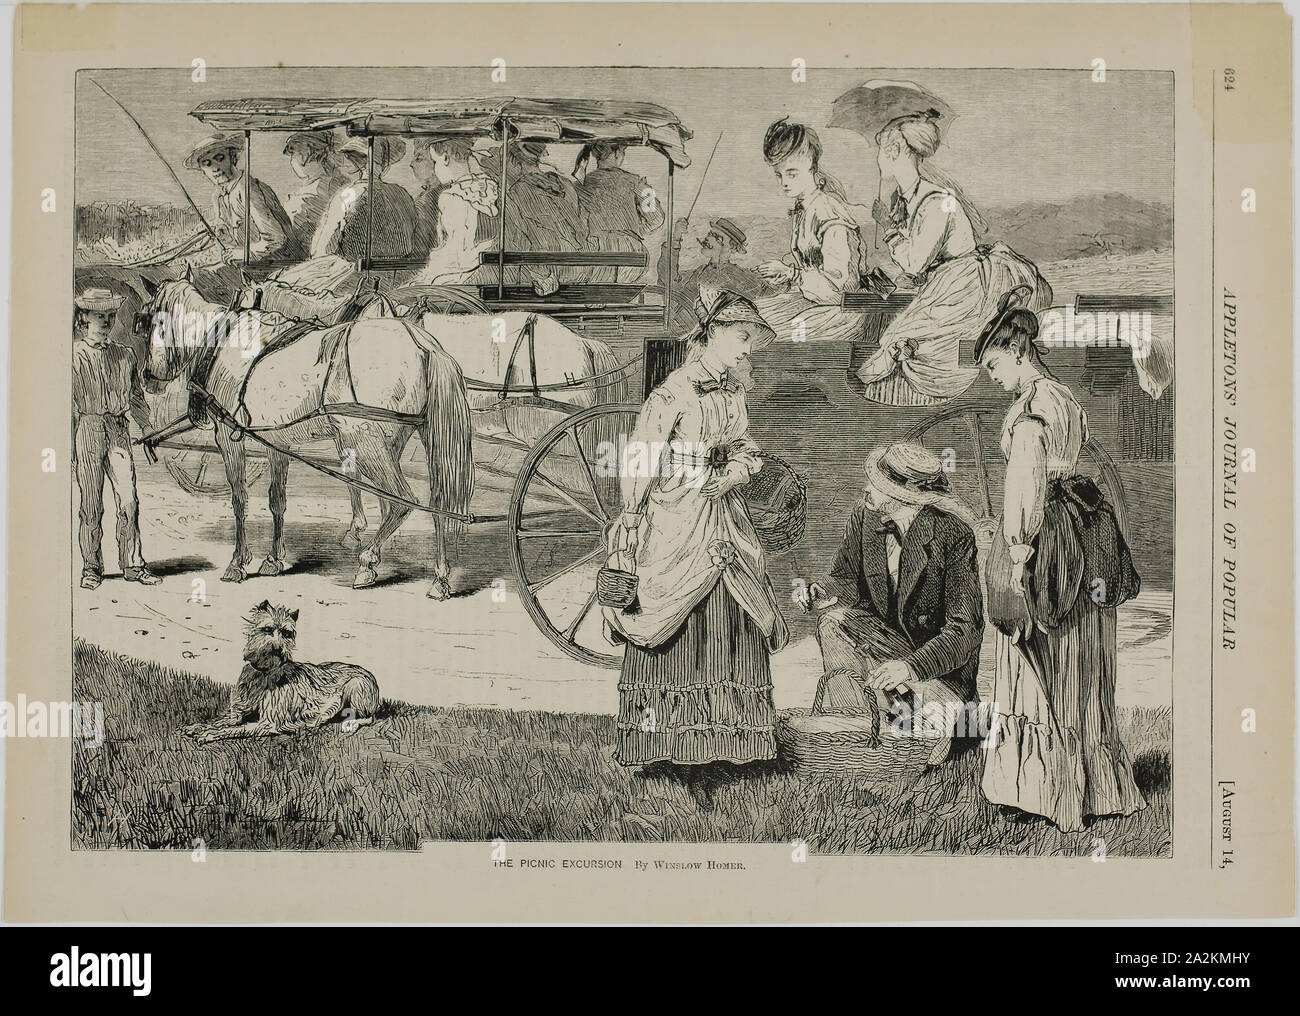 The Picnic Excursion, published August 14, 1869, Winslow Homer (American, 1836-1910), published by Appletons’ Journal (American, 1869-1881), United States, Wood engraving on paper, 166 x 232 mm (image), 194 x 272 mm (sheet Stock Photo